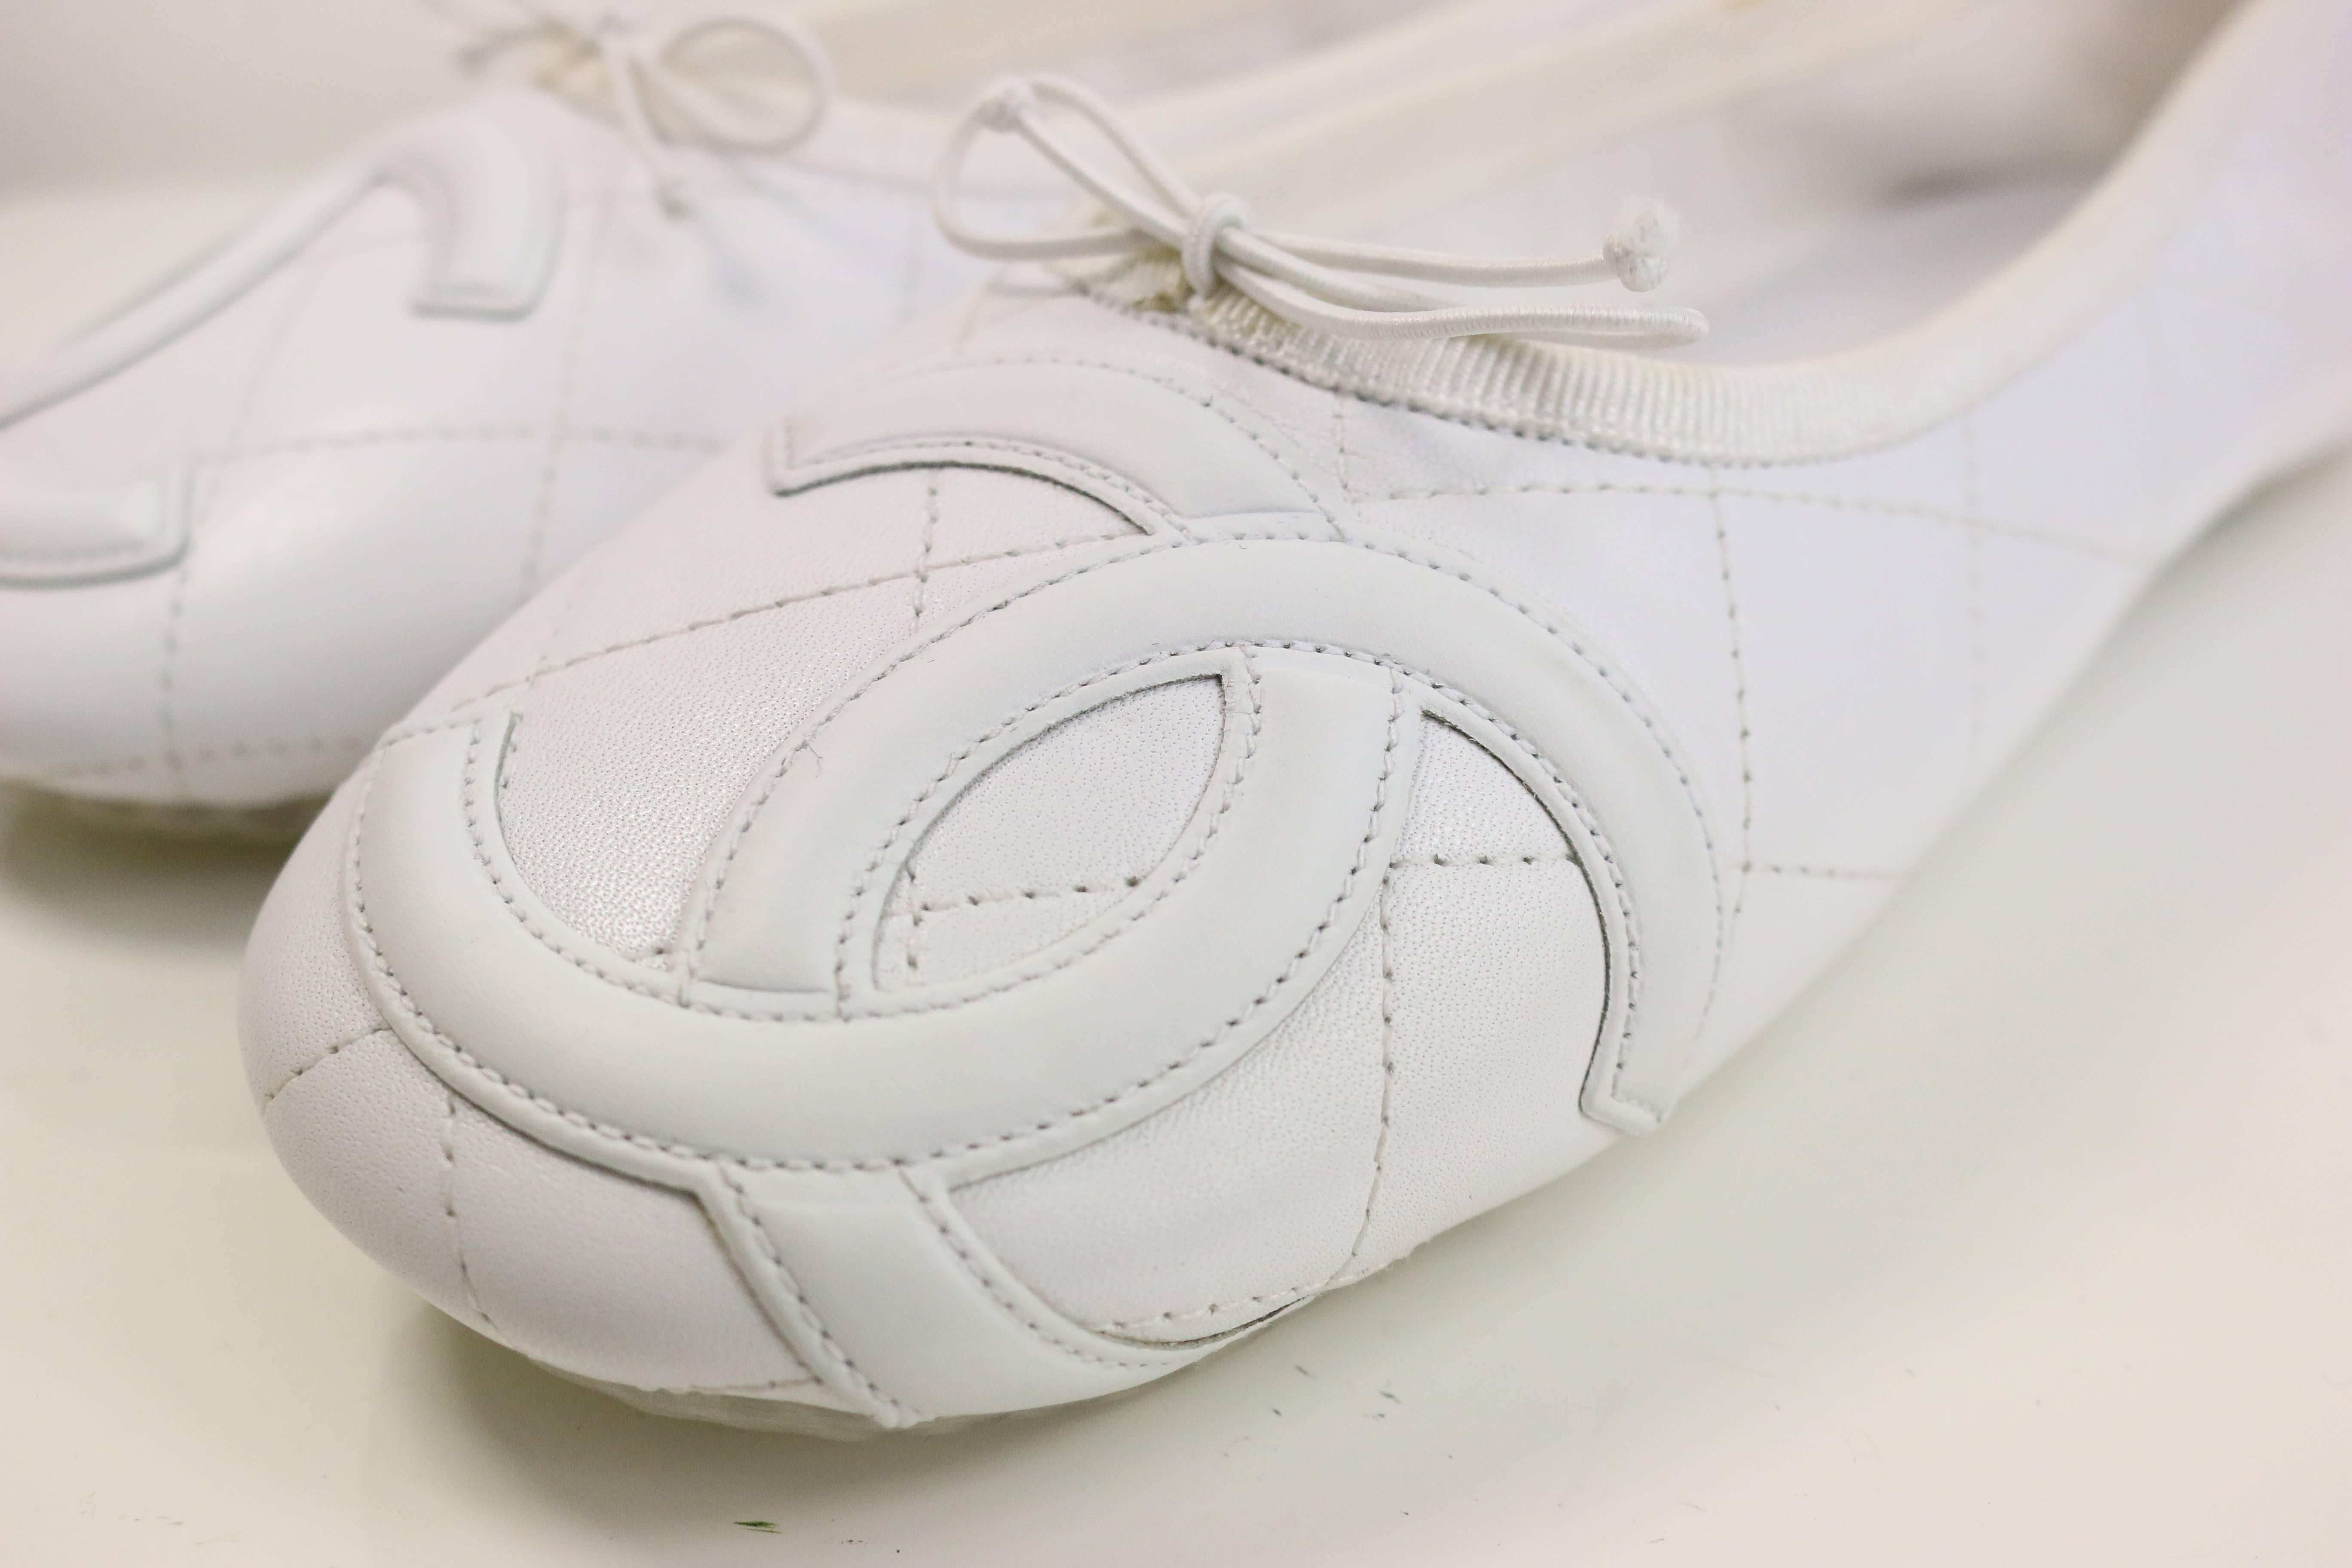 - Vintage 90s Chanel white leather quilted Mary Jane ballet cambon flats with a plastic sole. 

- Size 38. 

- Made in Italy. 

- Include: Dust bag. 

- Please note this vintage item is not new, so it might have minor imperfections.


